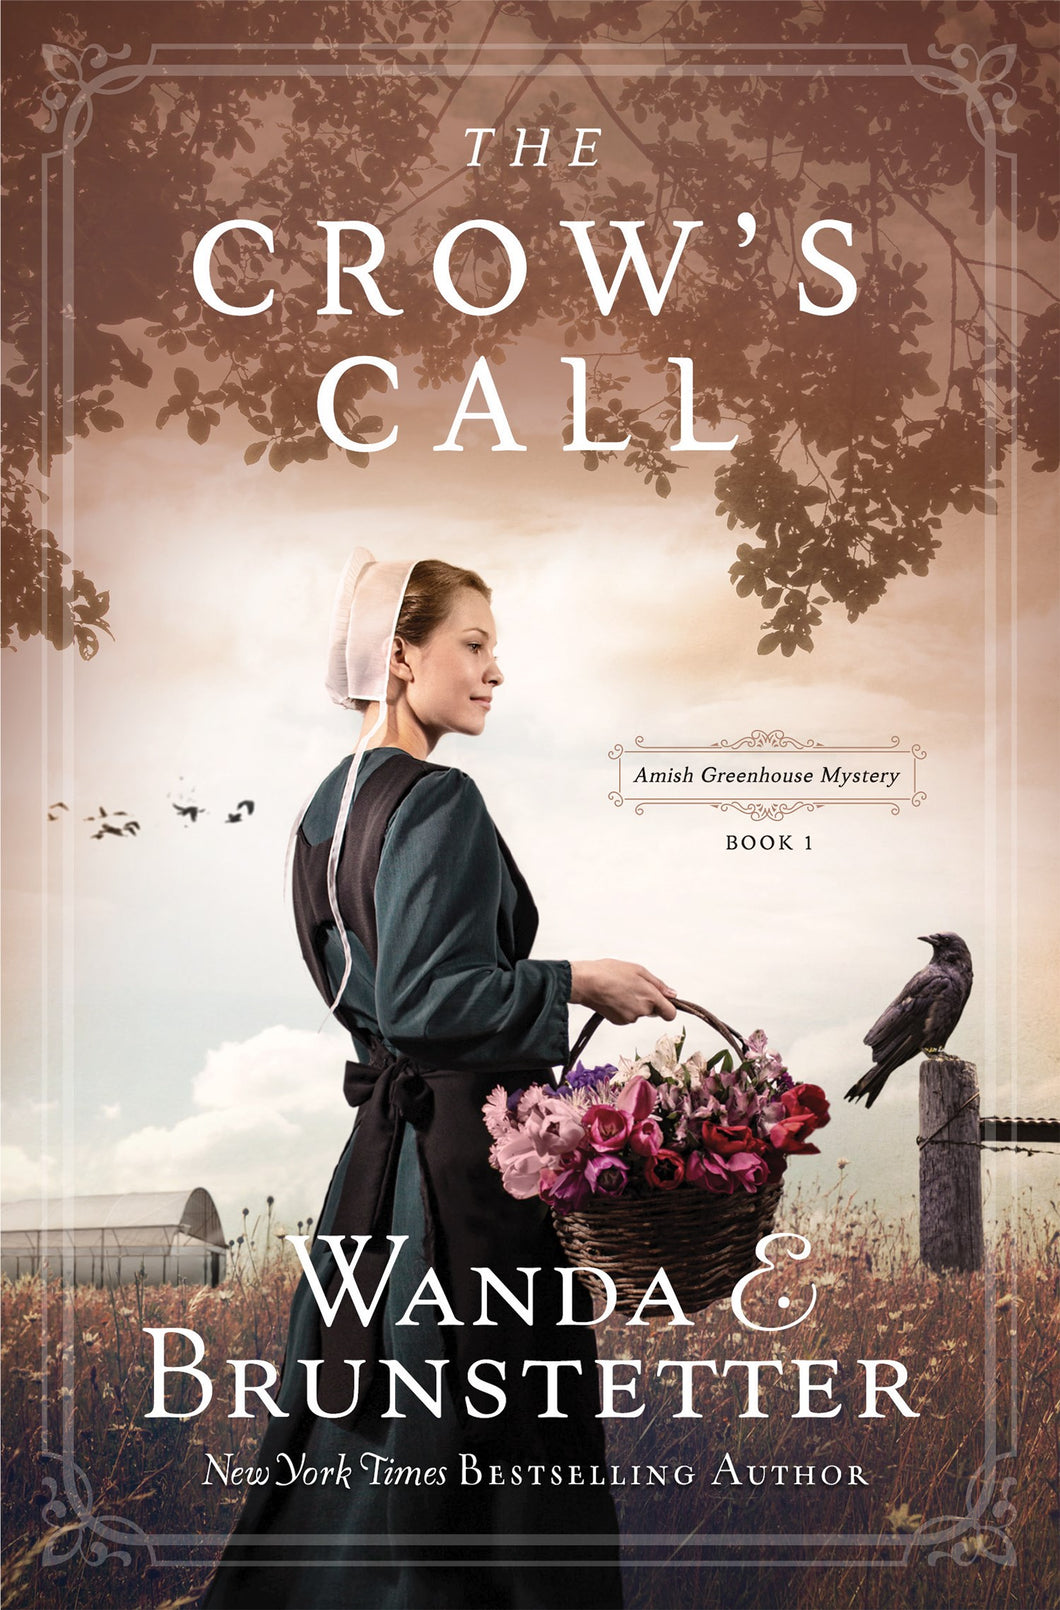 The Crow's Call (Amish Greenhouse Mystery #1)